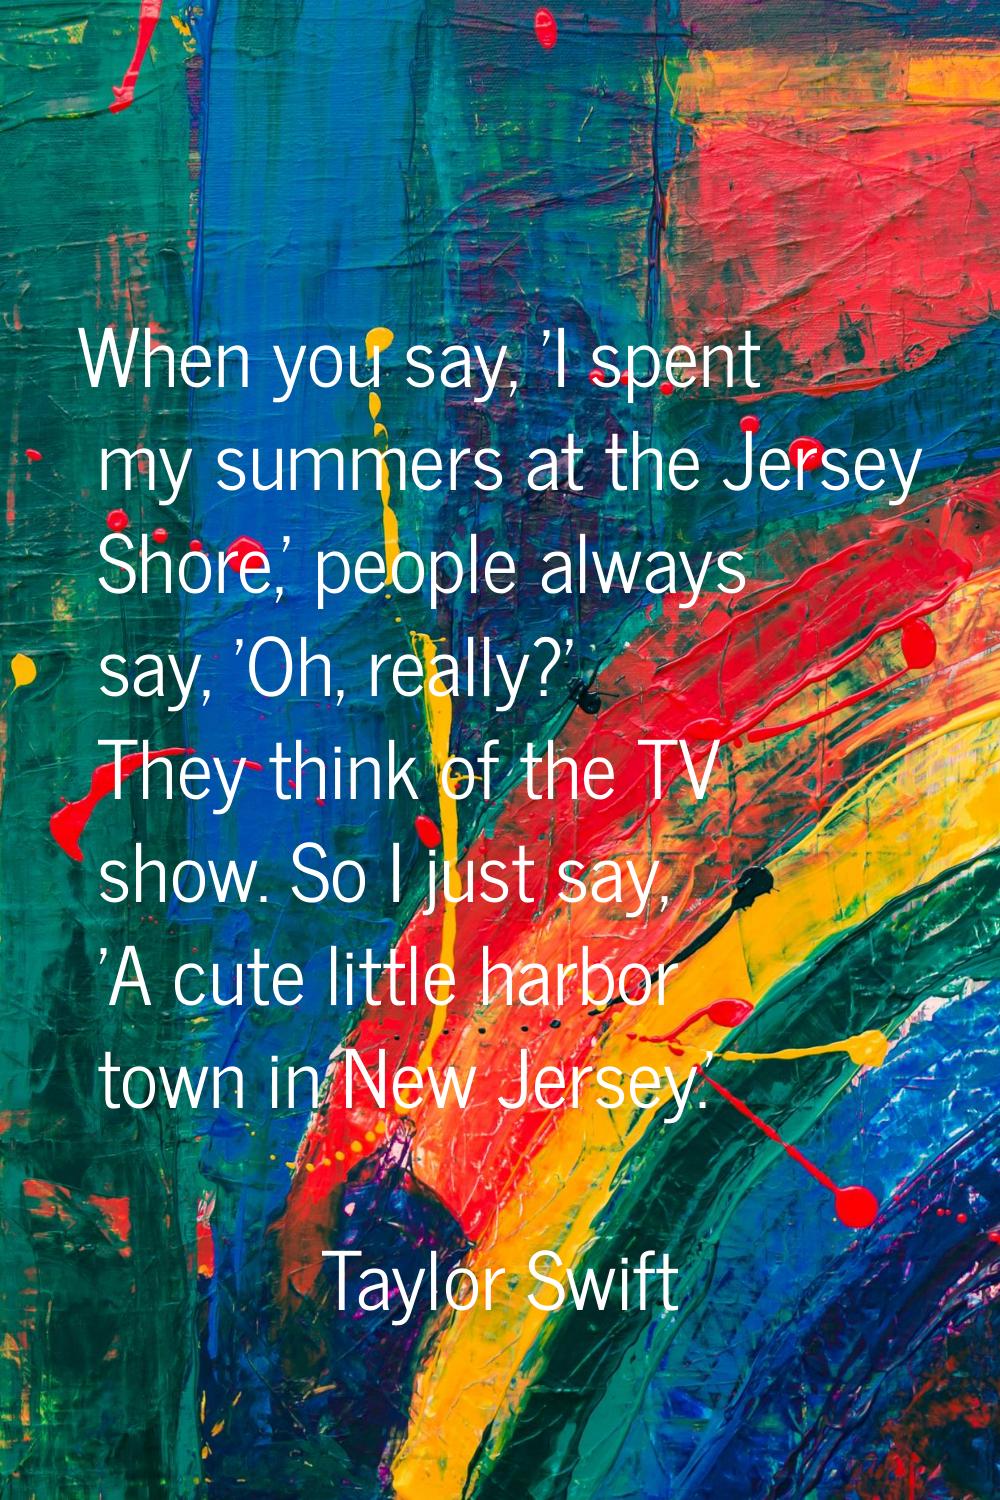 When you say, 'I spent my summers at the Jersey Shore,' people always say, 'Oh, really?' They think